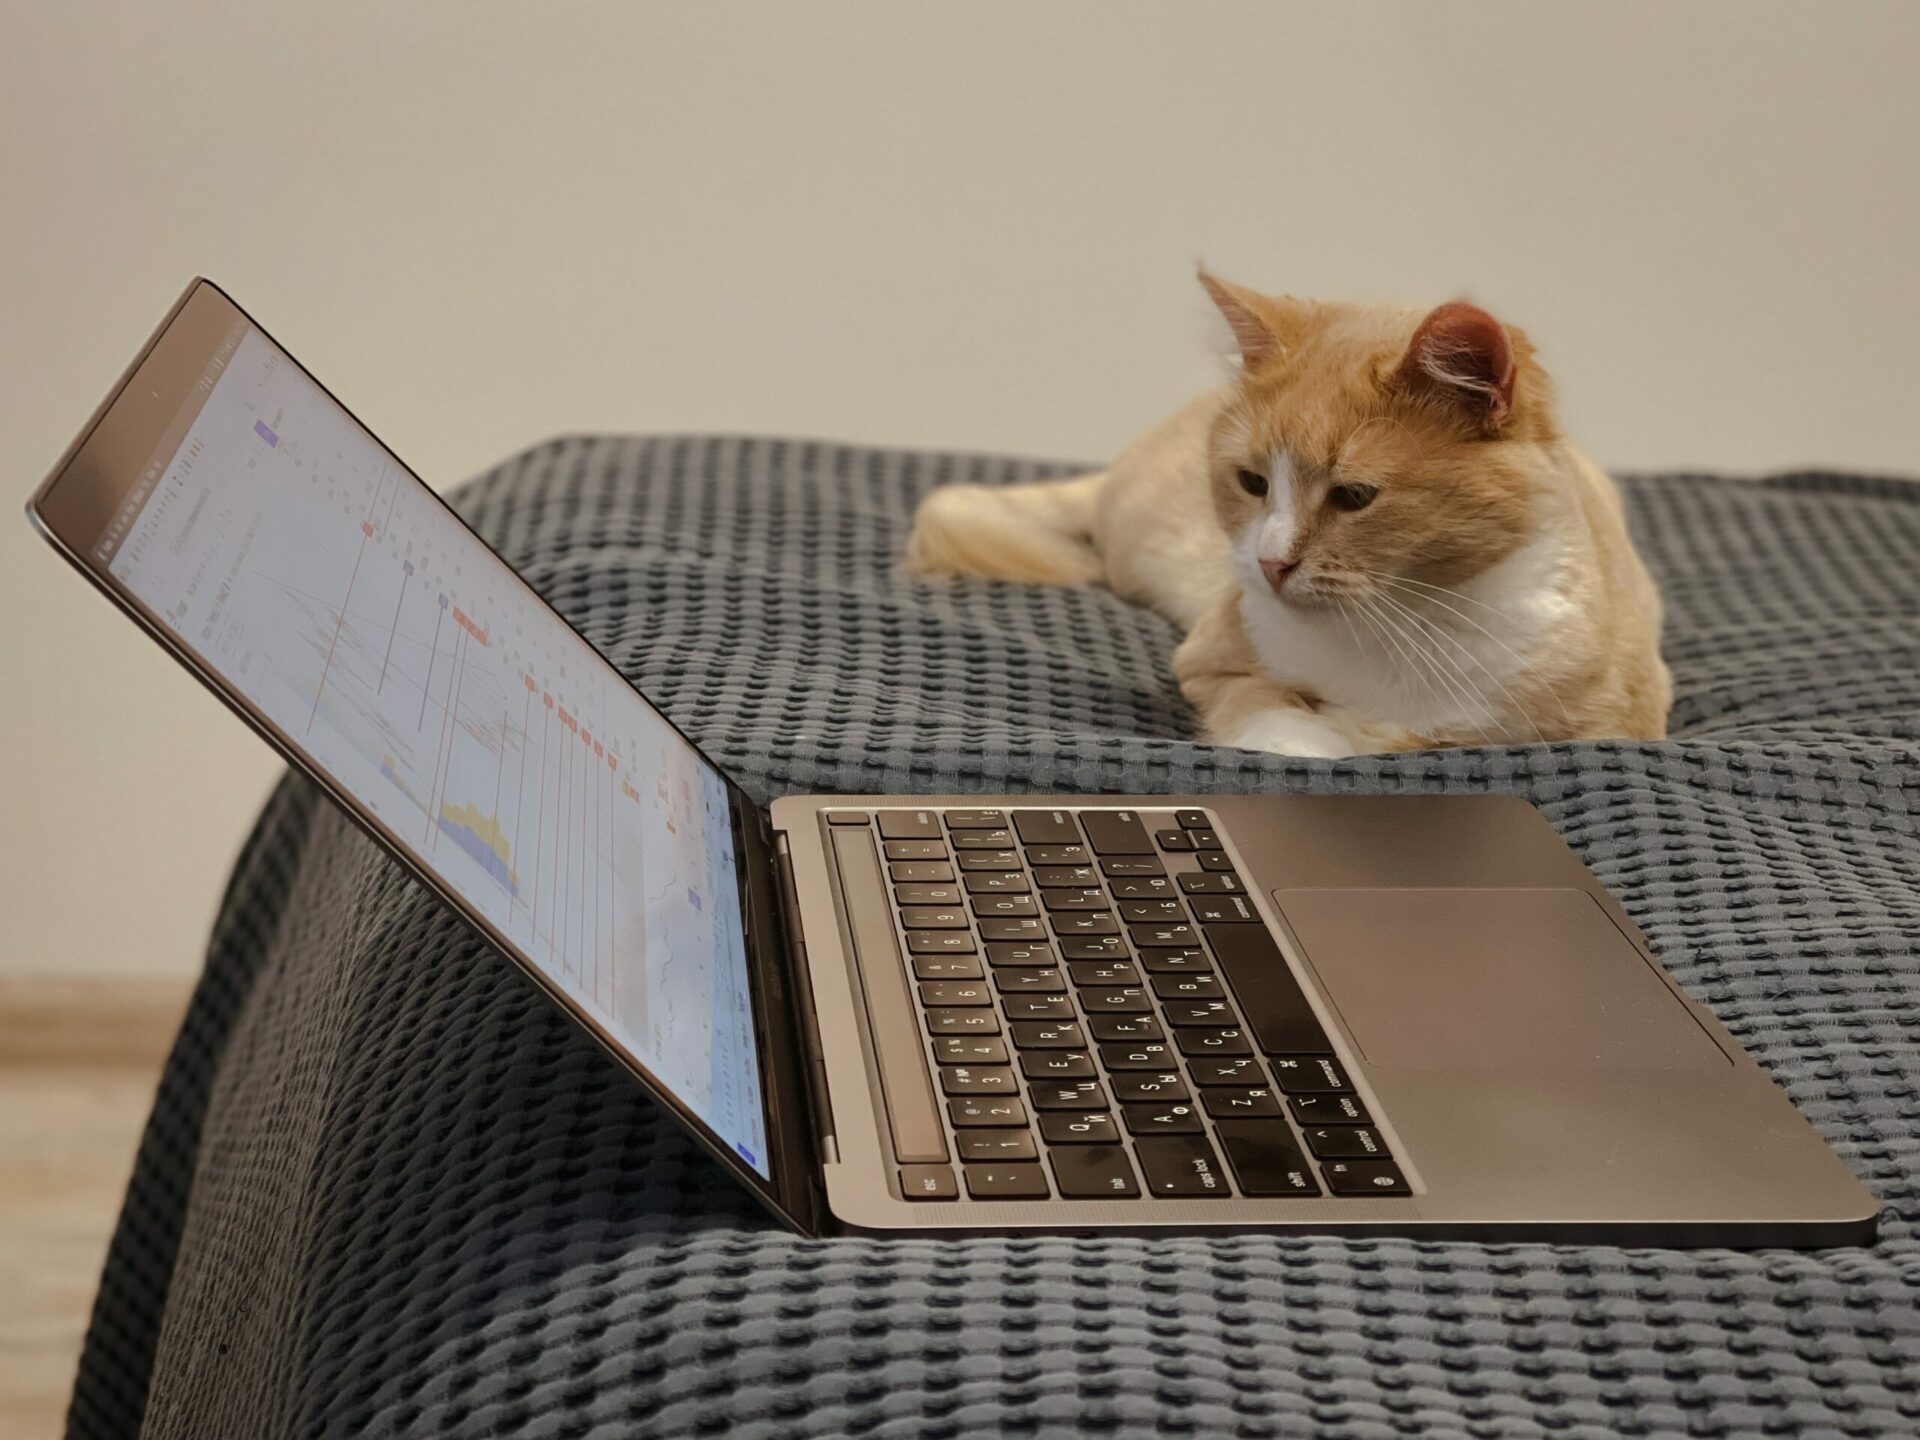 An orange and white cat sitting on a bed next to an open laptop.